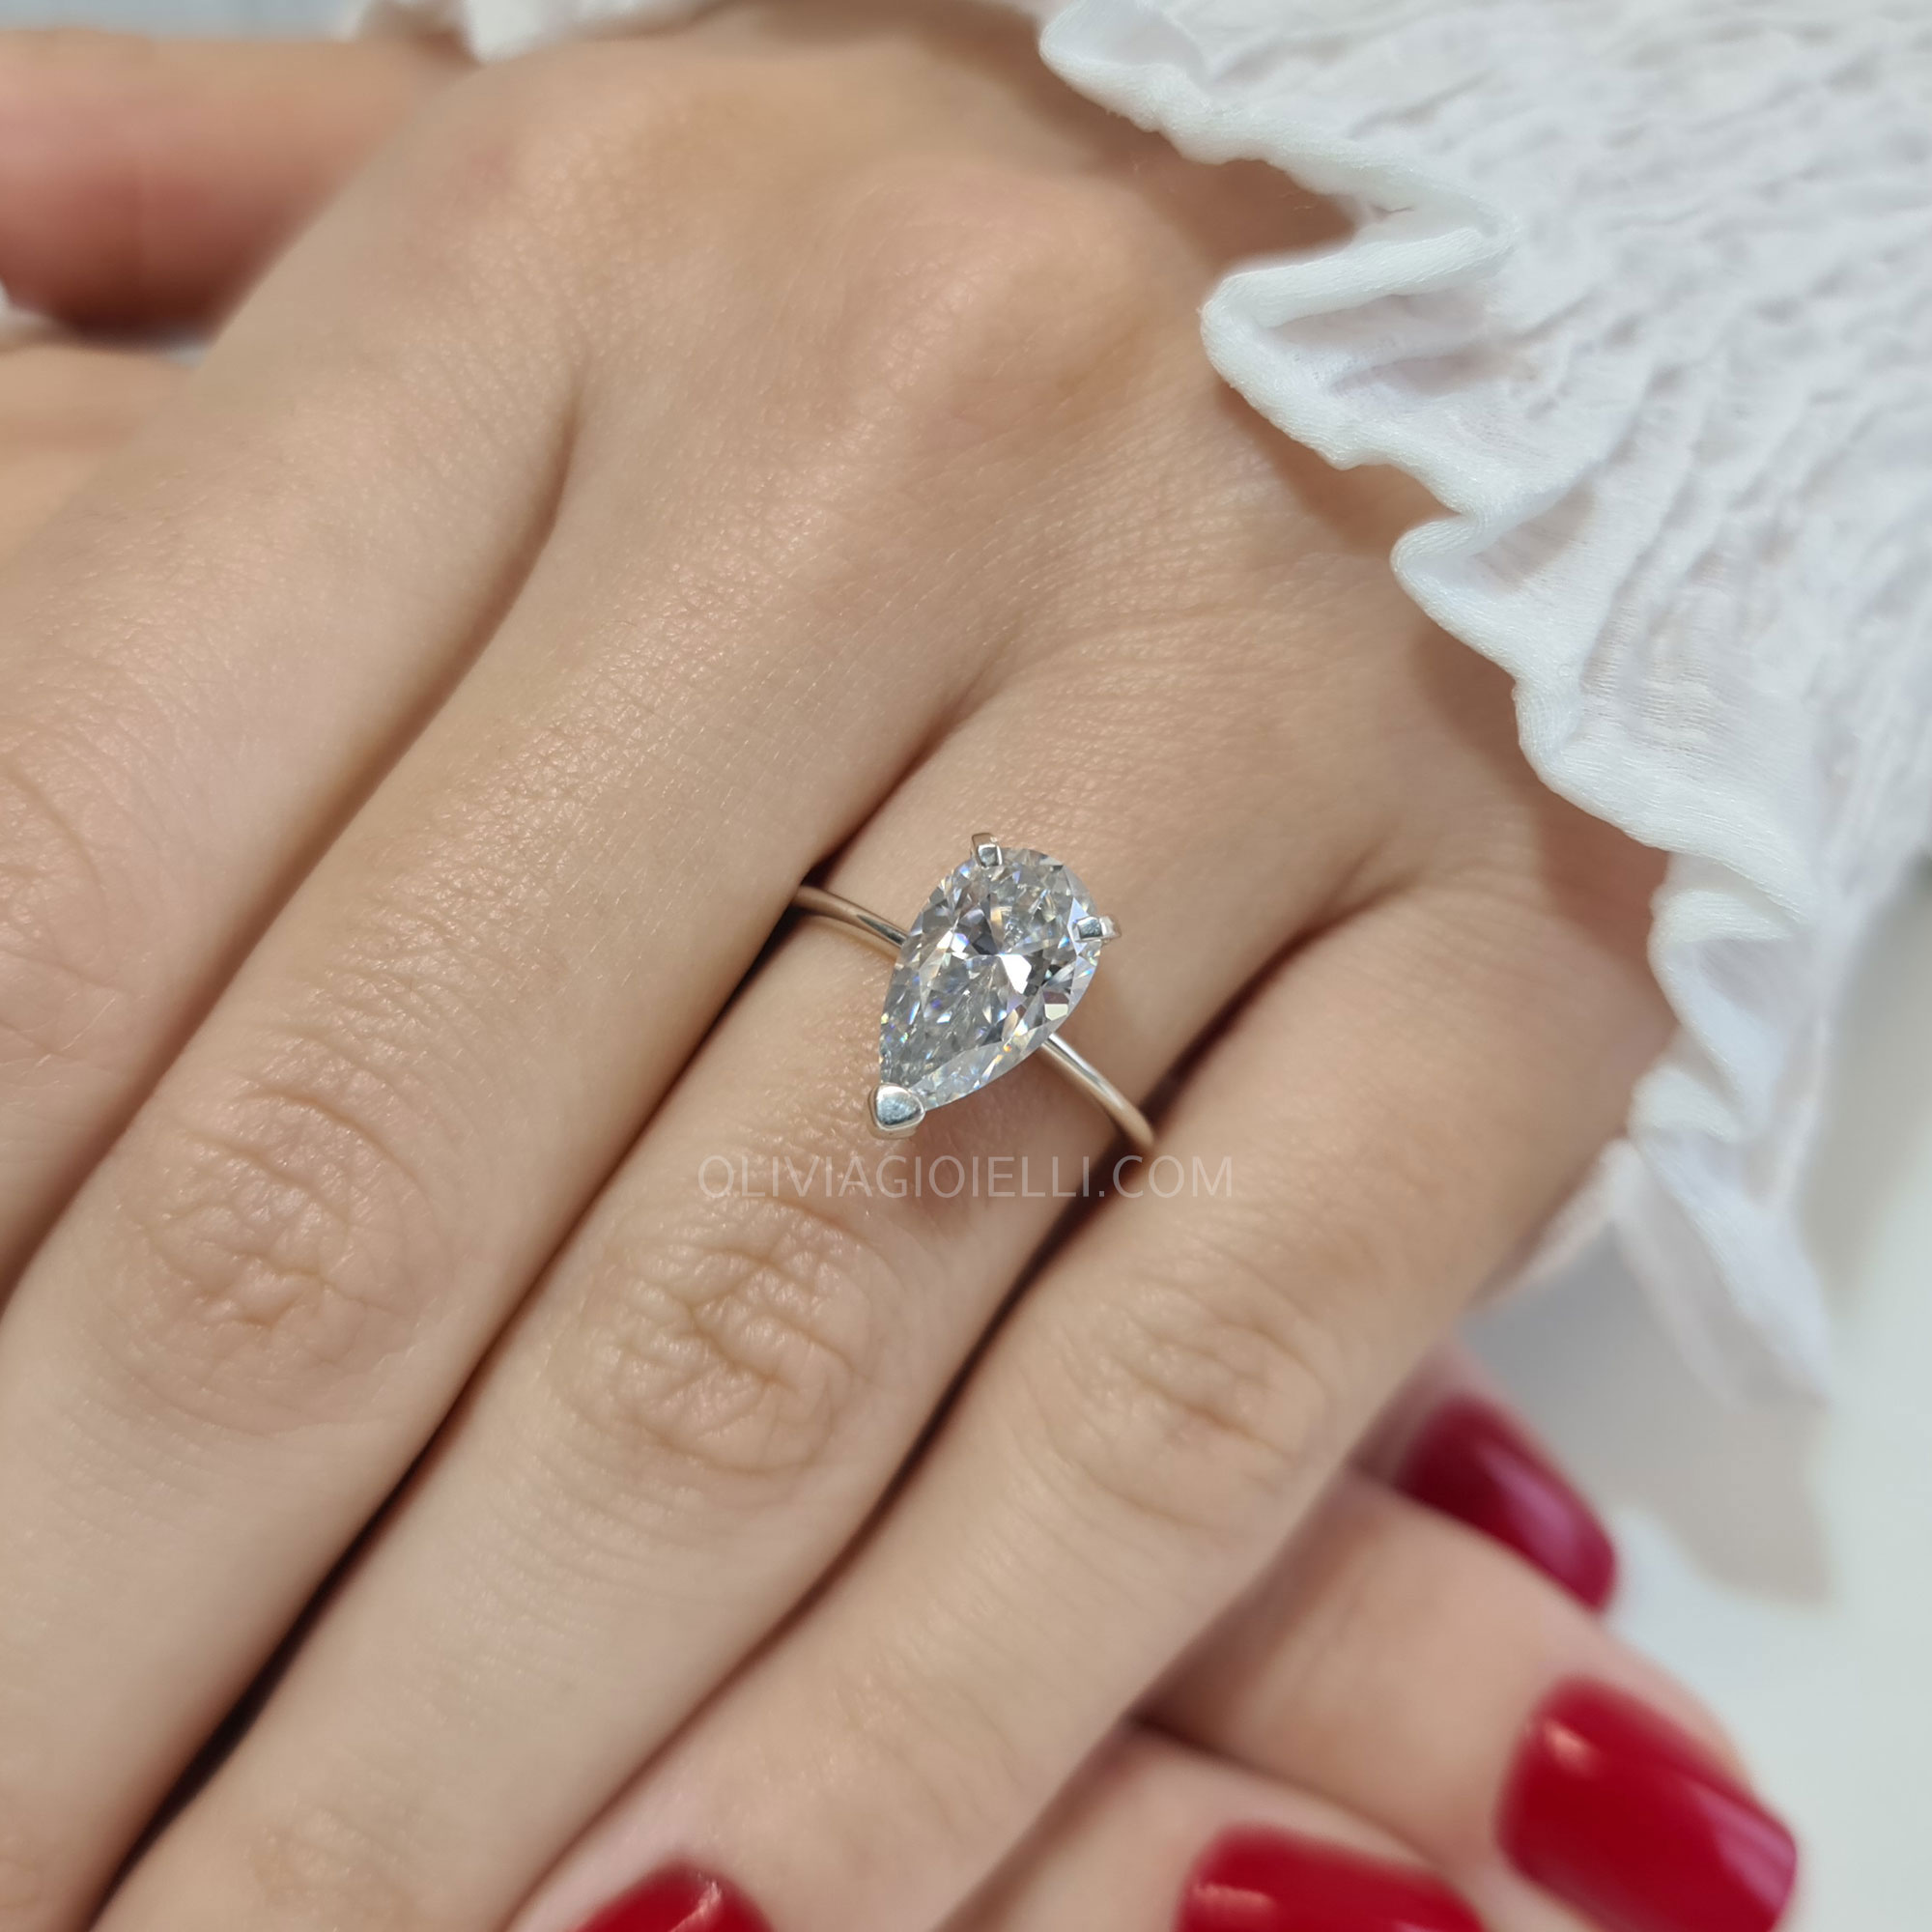 3.2ct Elongated Pear Shaped Moissanite Engagement Ring